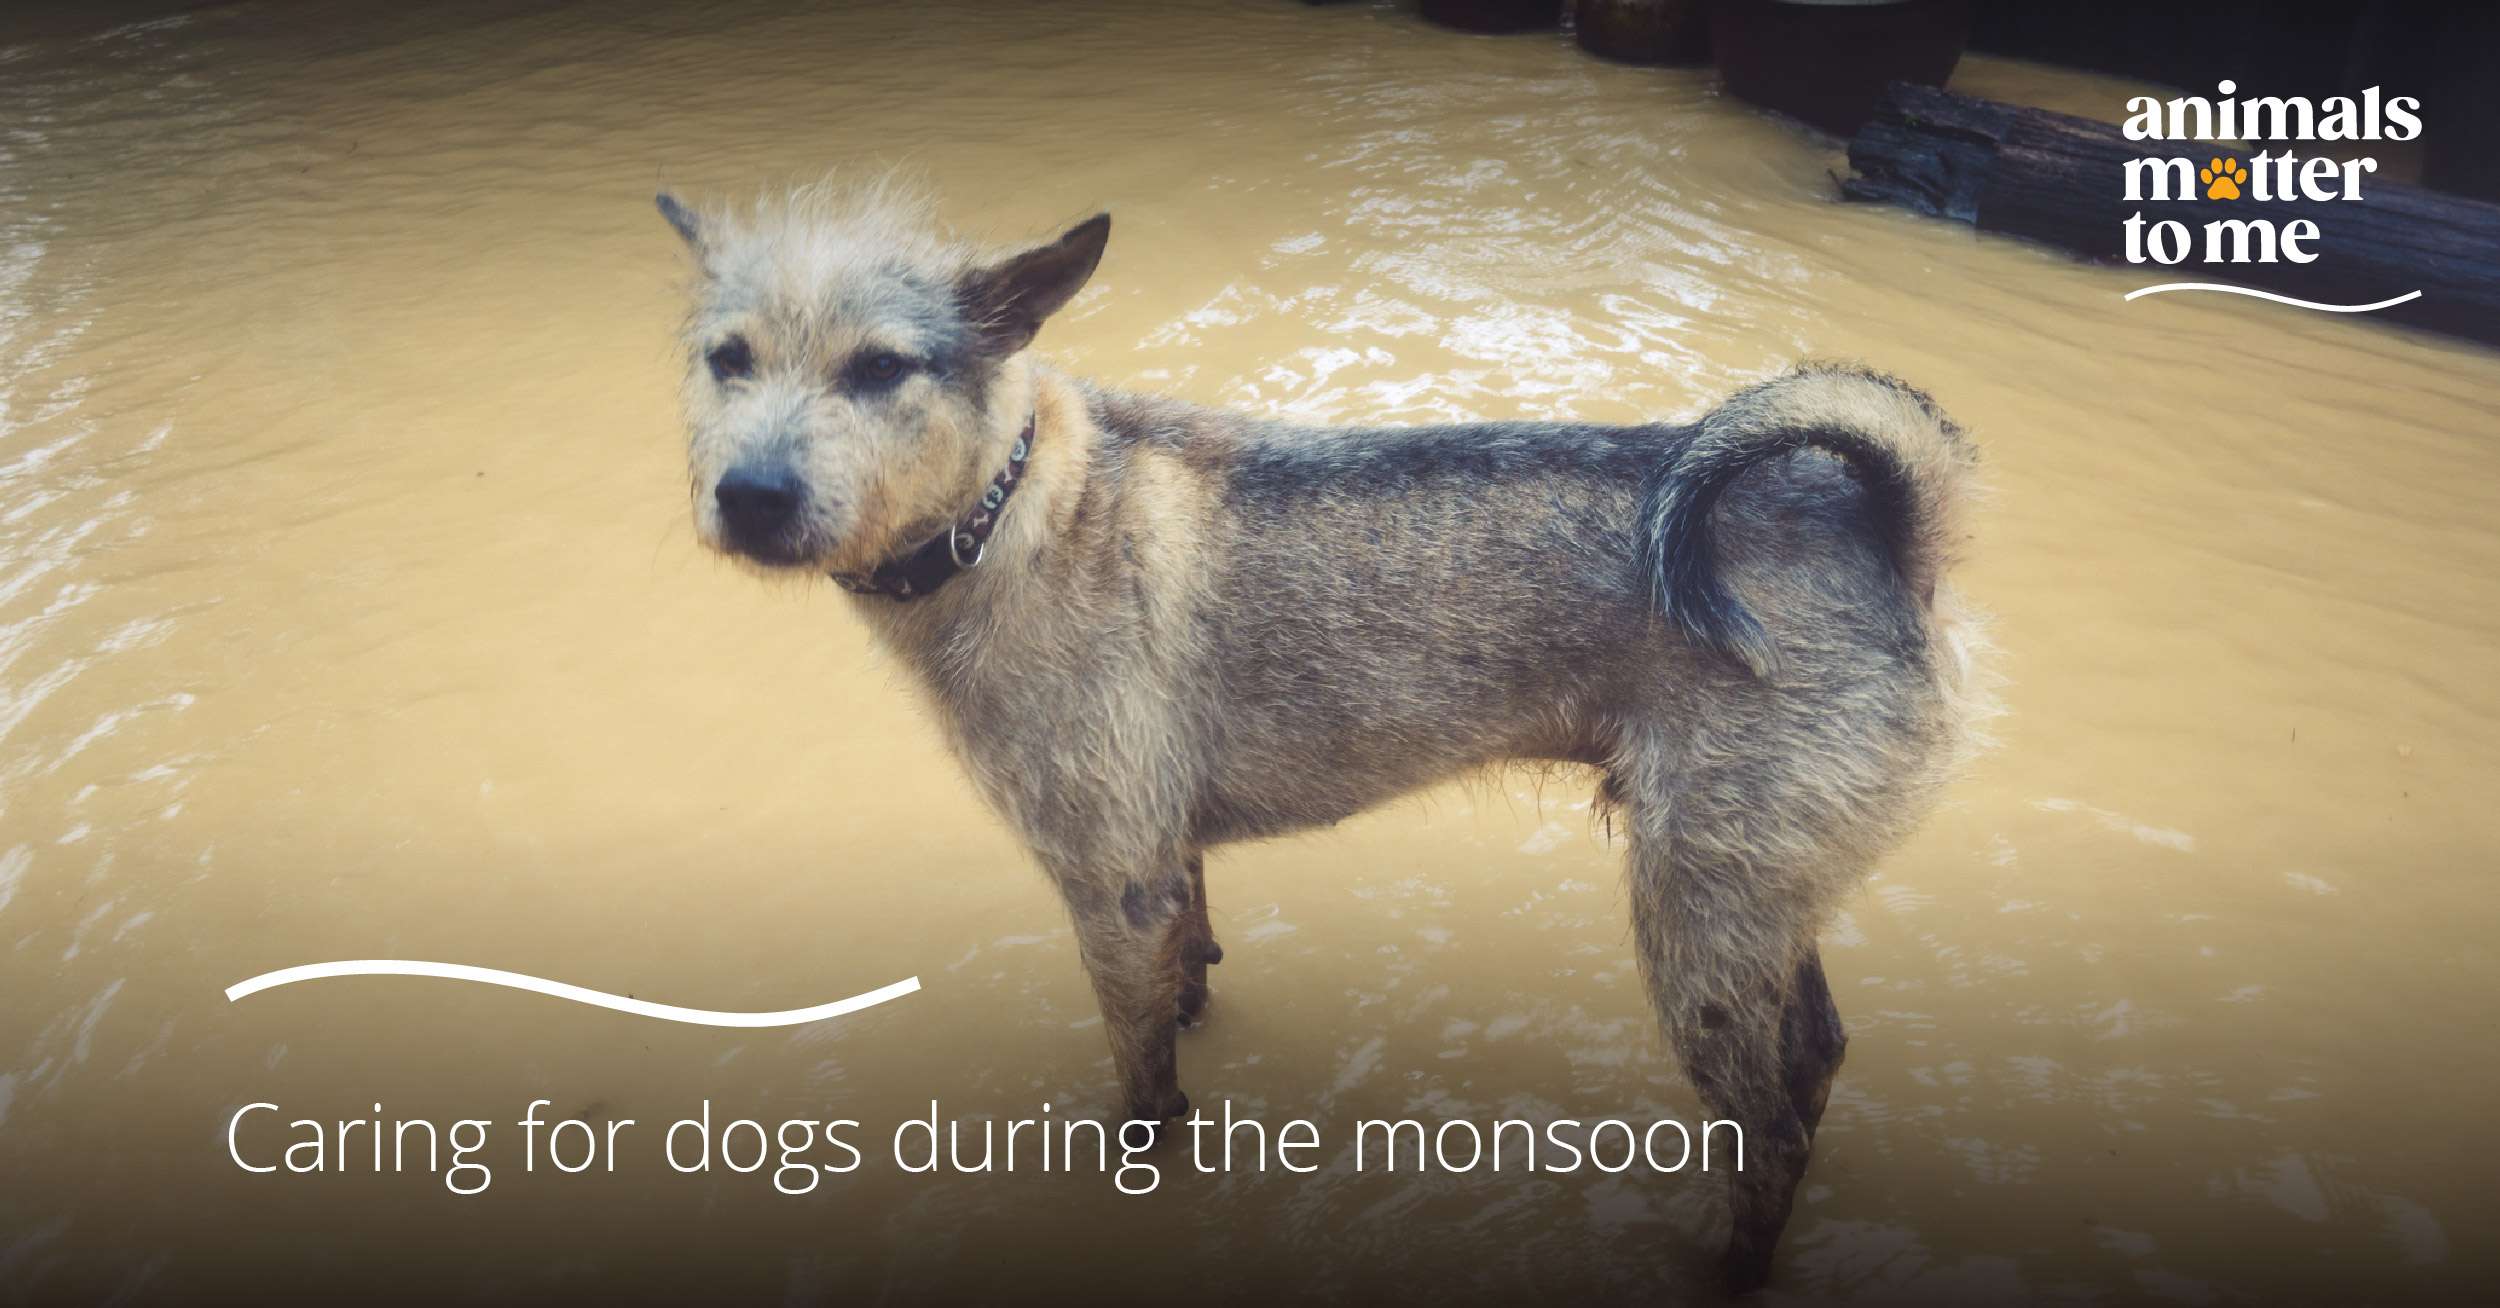 Caring for dogs during the monsoons